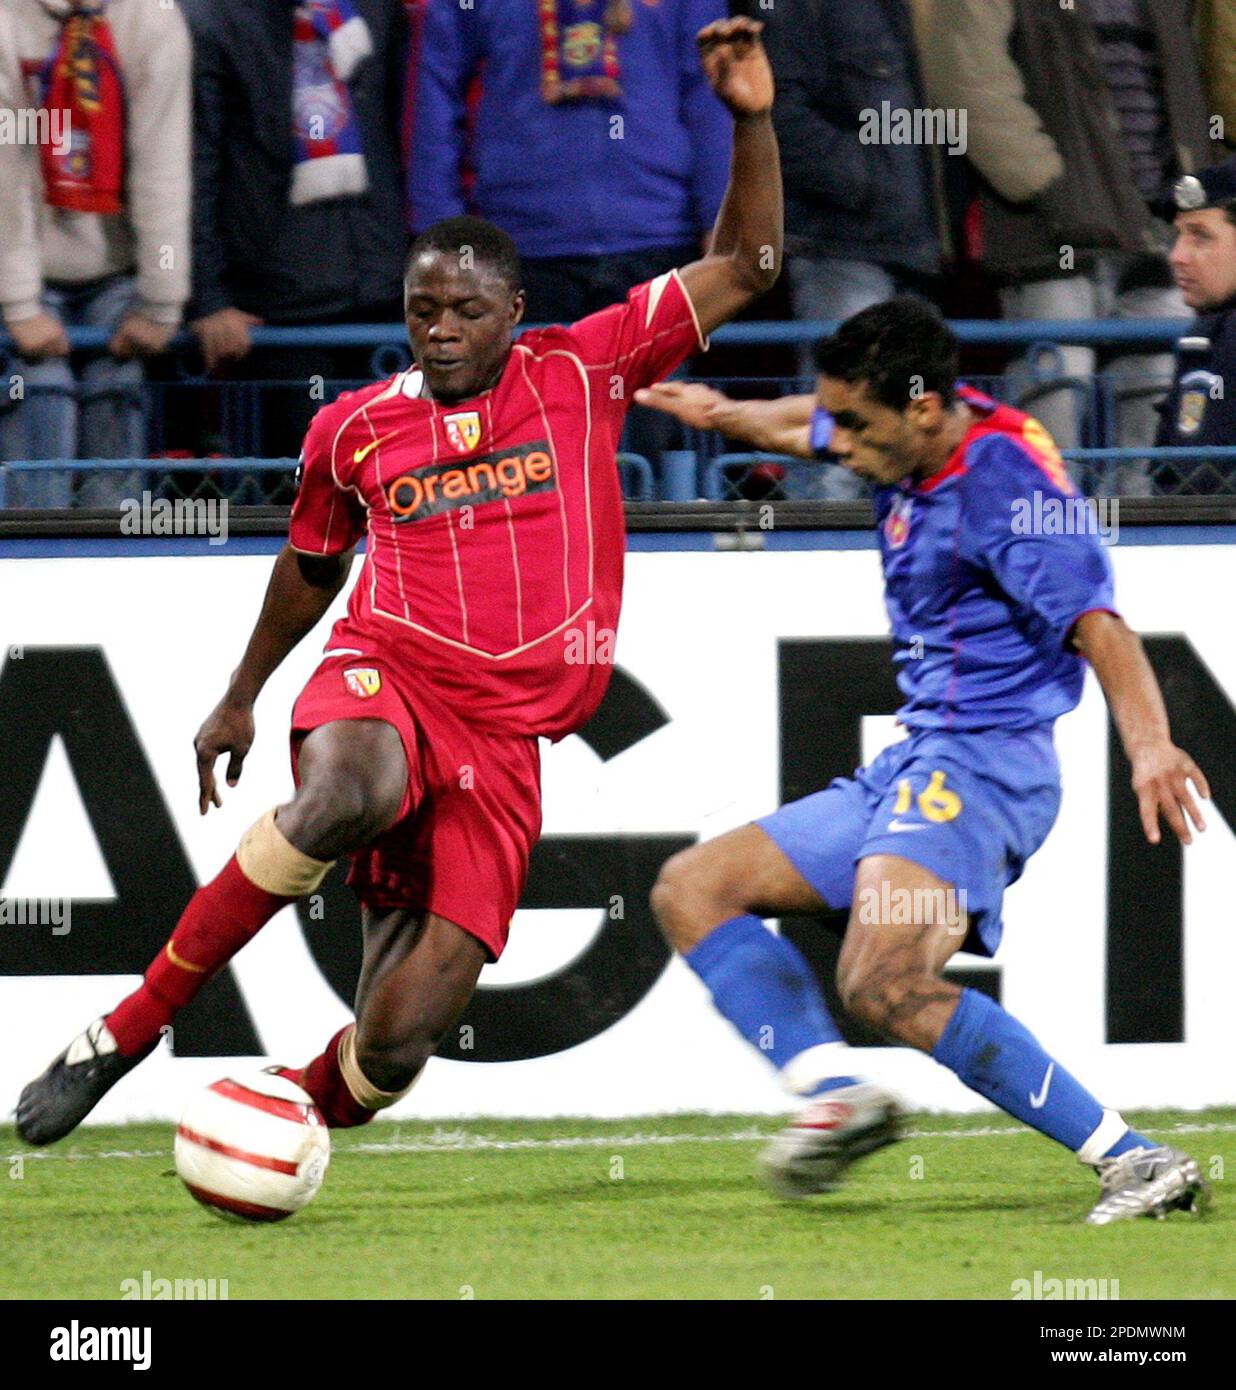 Aruna Dindane, left, of RC Lens duels for the ball with Banel Nicolita of  FC Steaua, during their UEFA Cup, Group C, soccer match, Thursday, Oct. 20,  2005 in Bucharest, Romania. (AP